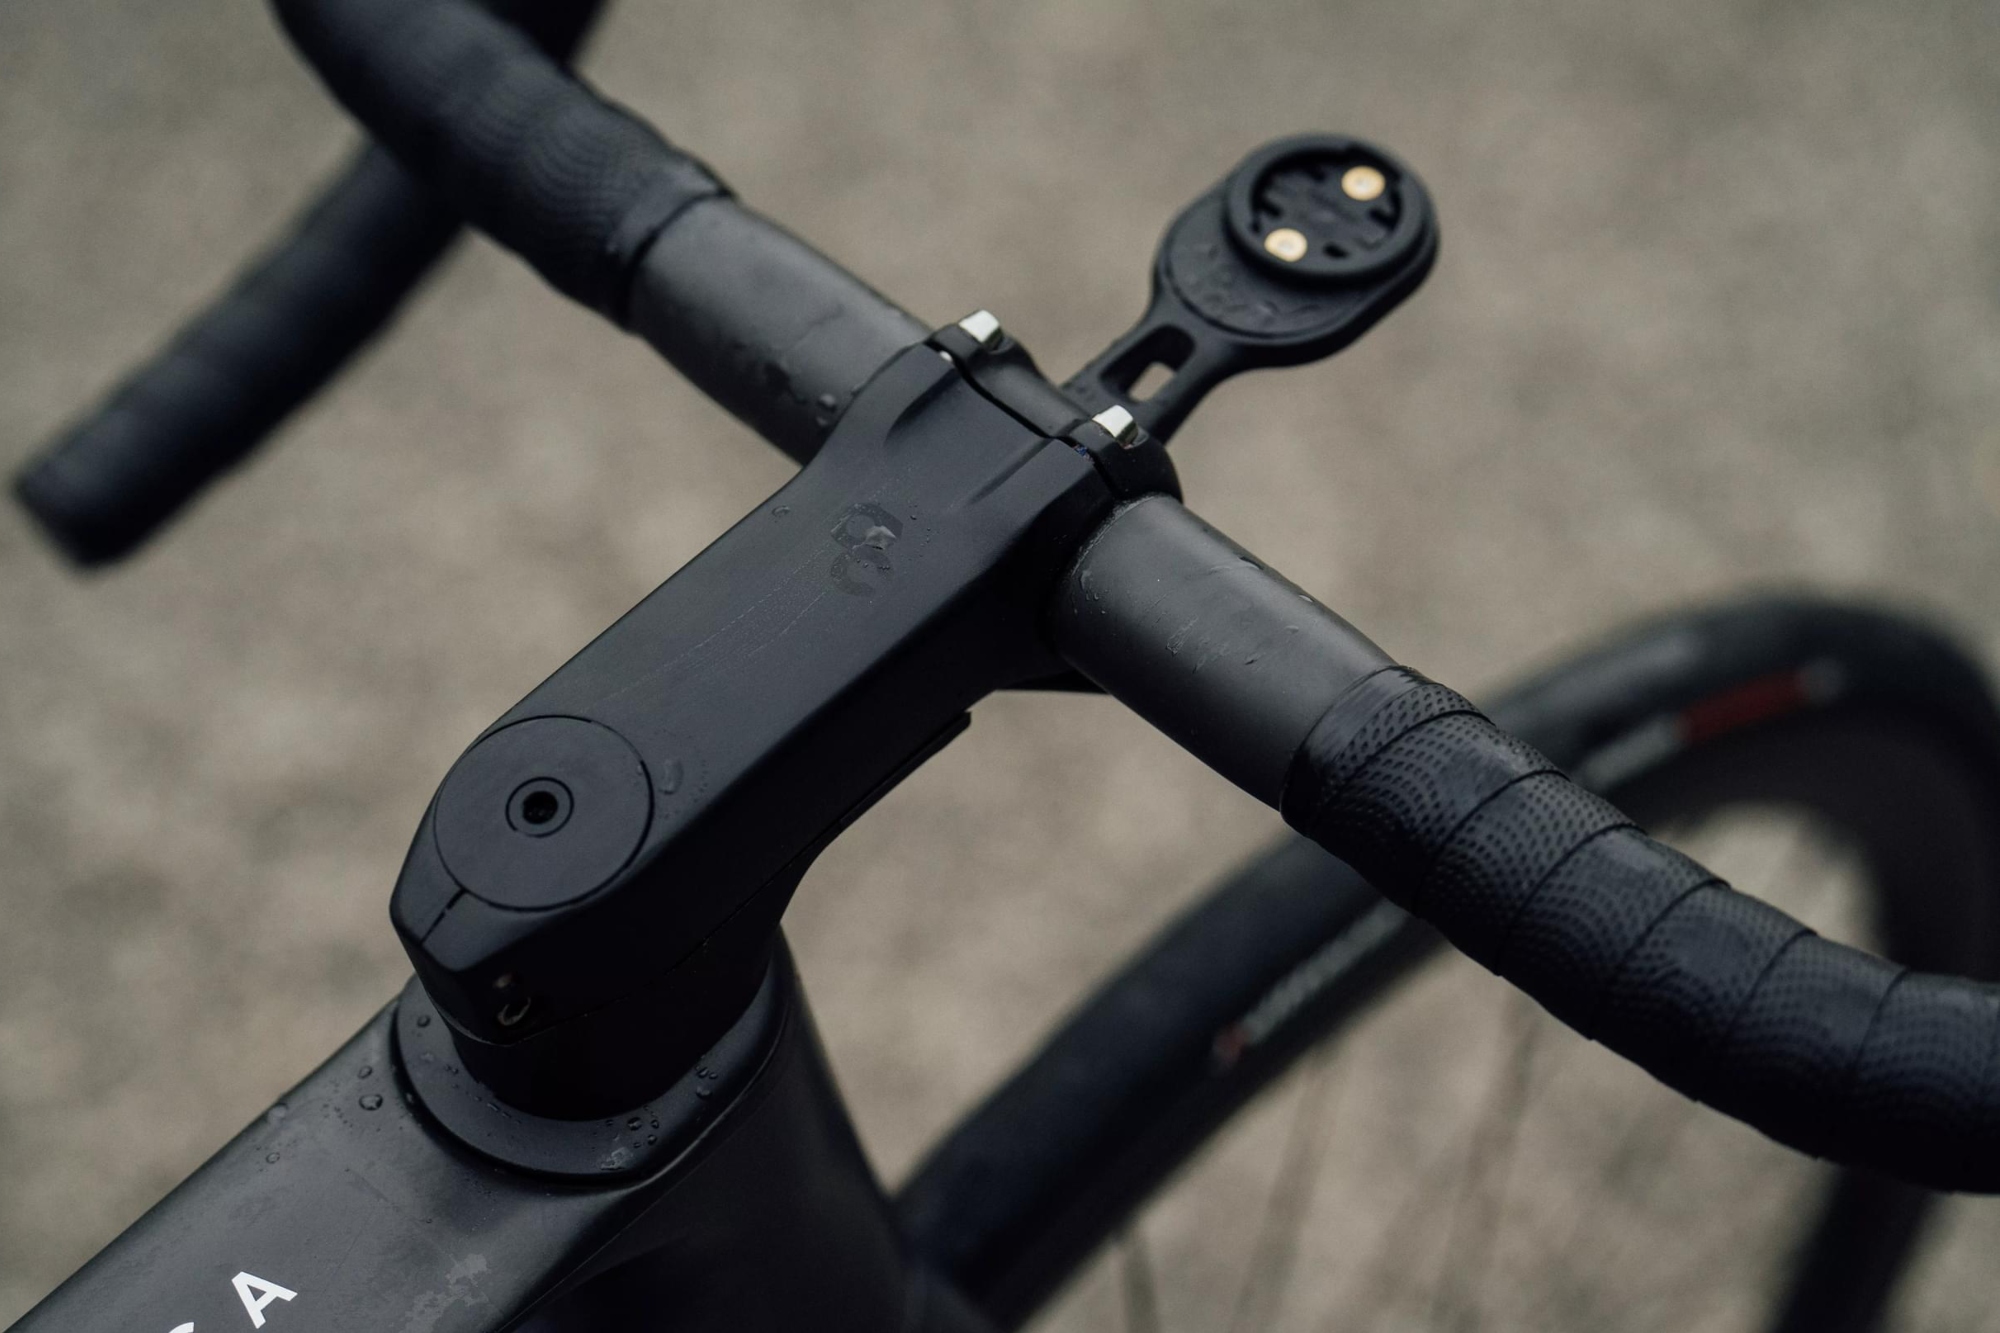 The new Orbea Orca surfaces to reclaim its lightweight credentials ...